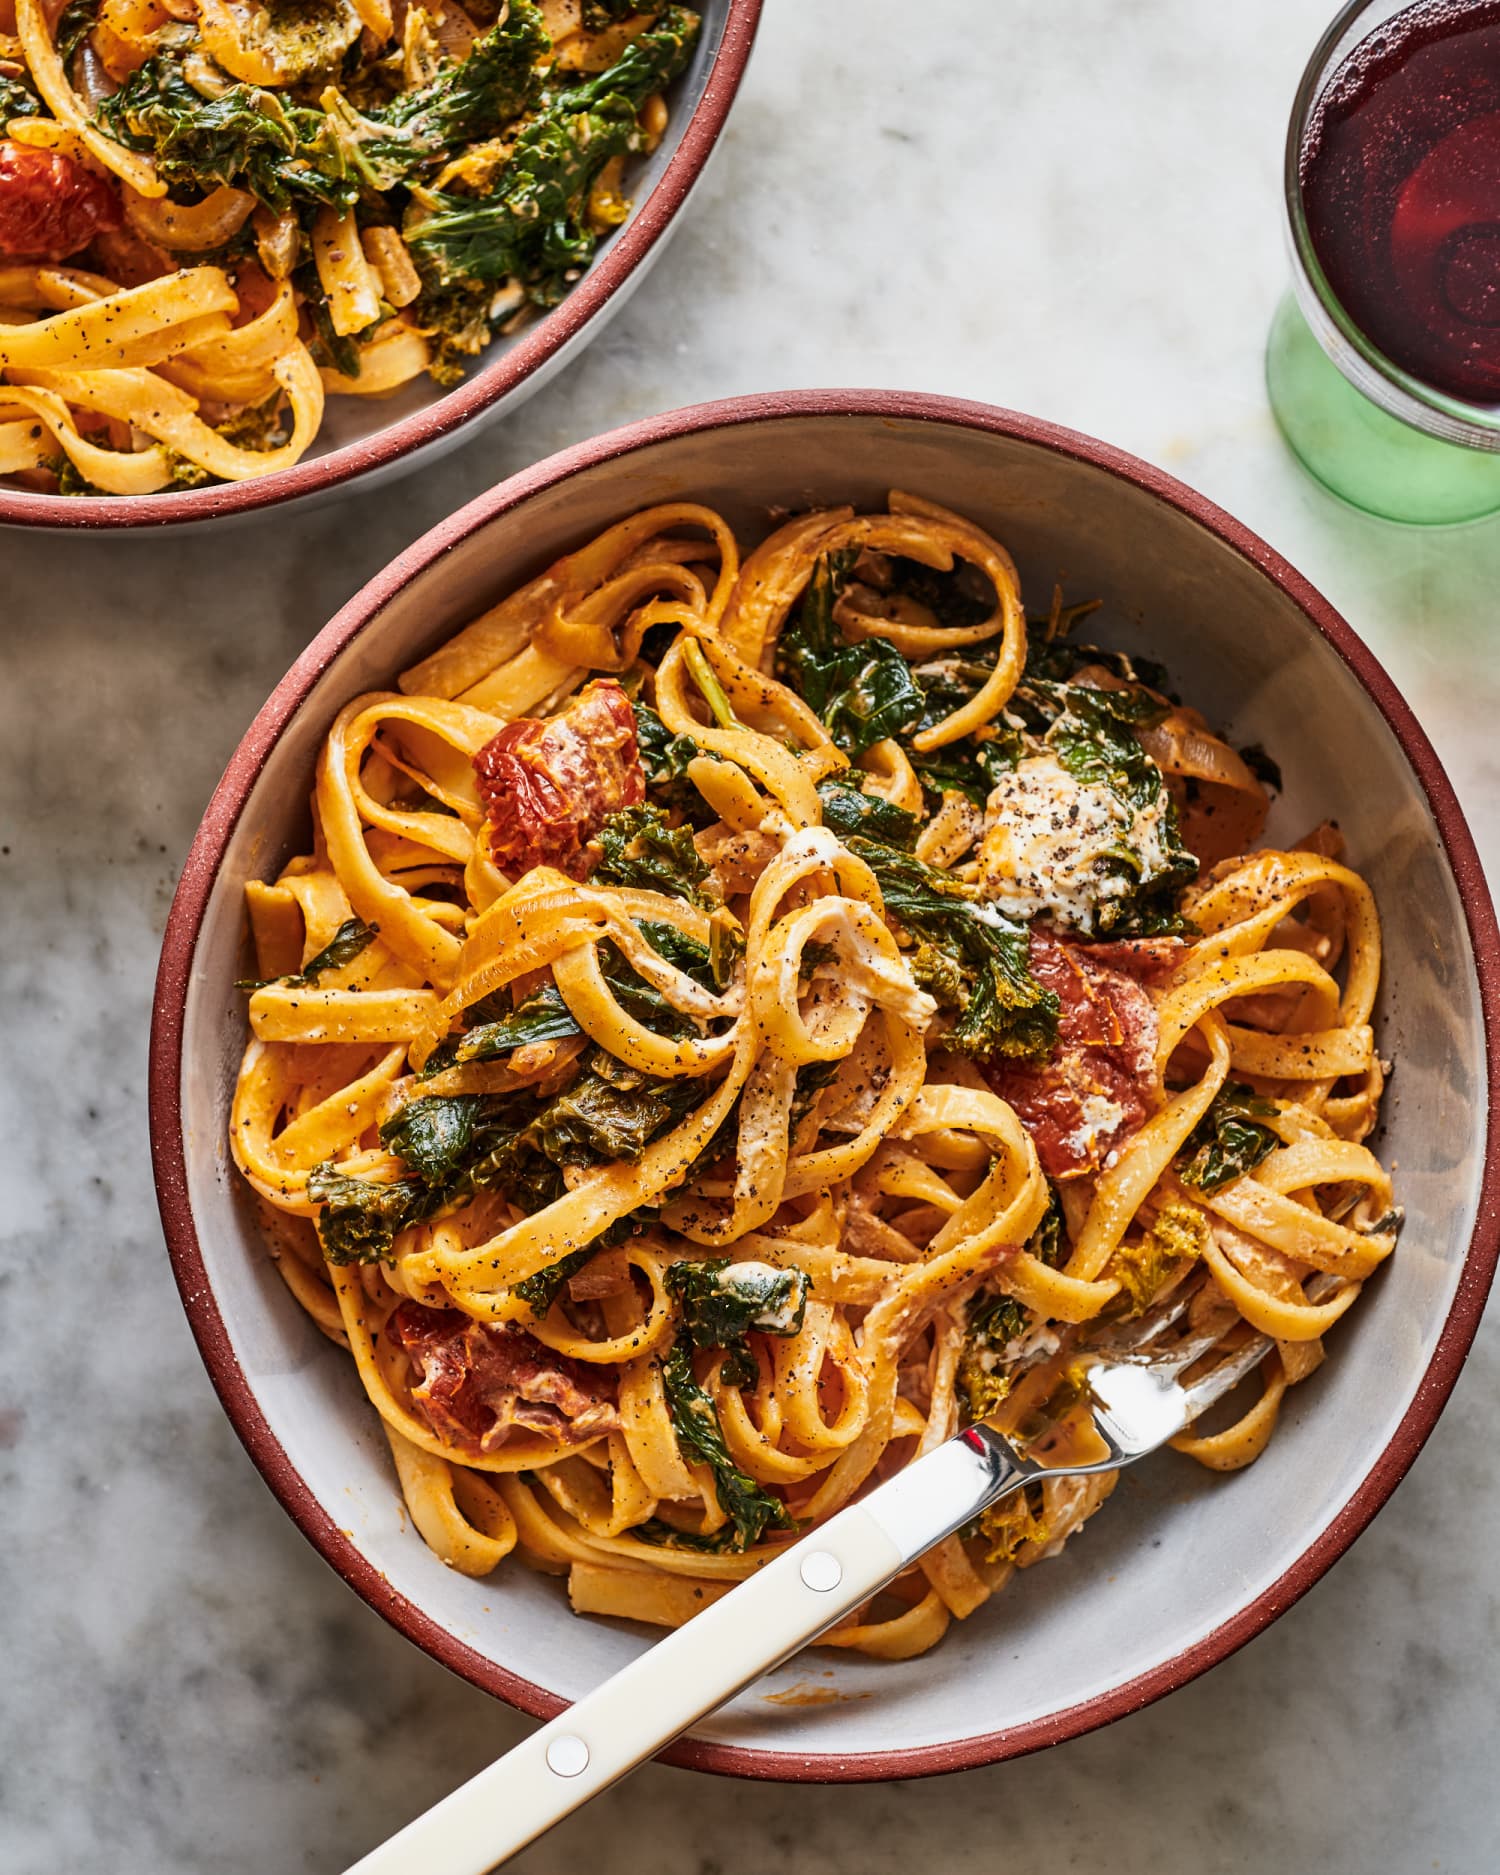 This Smoky, Cheesy Pasta Dish Is the Easiest Way to Eat Your Greens